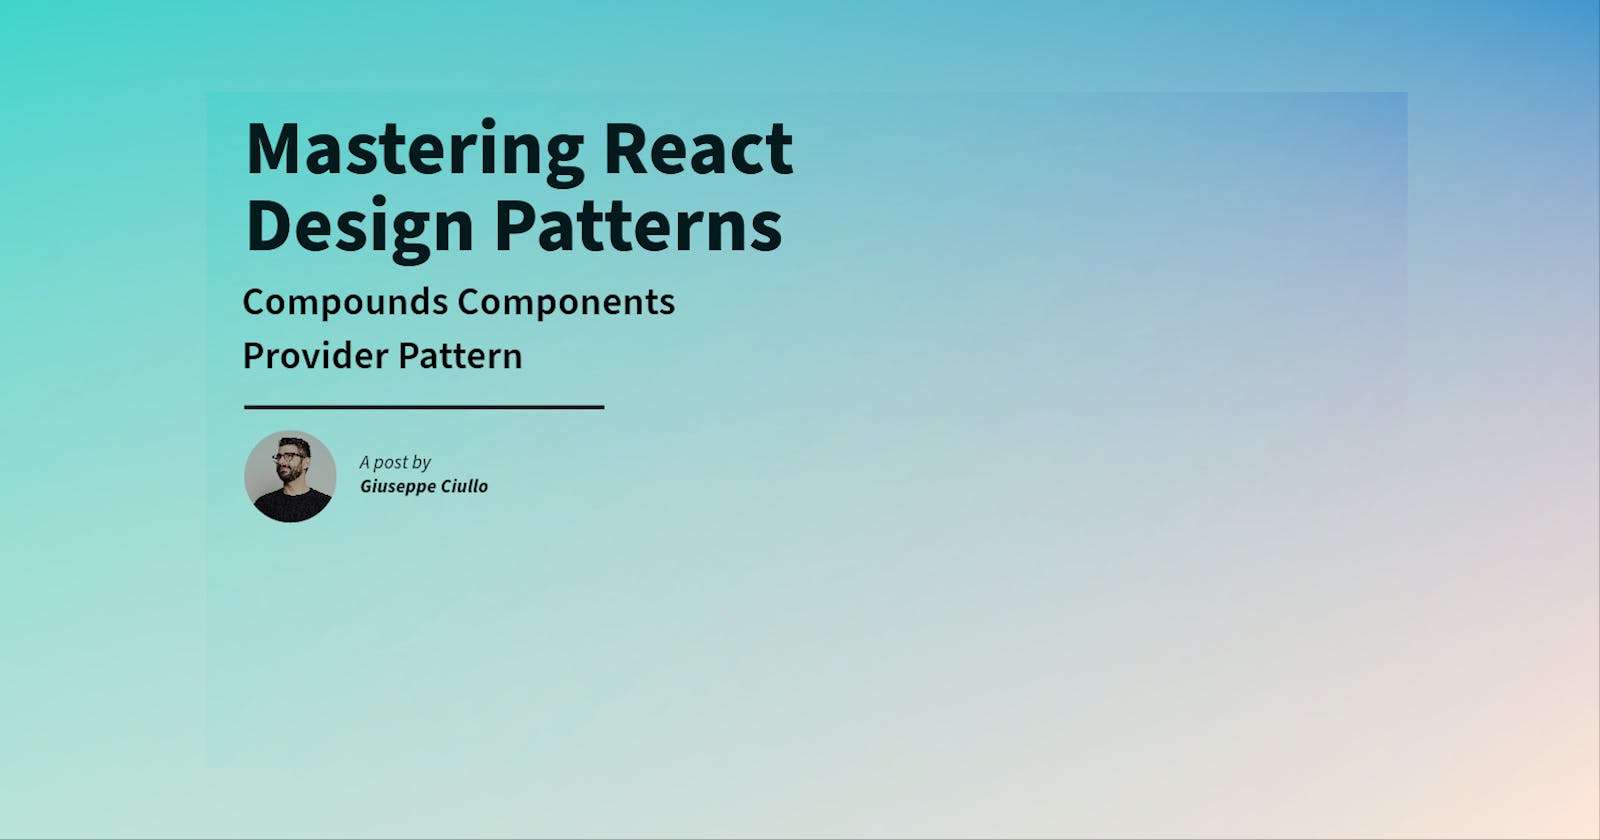 Mastering React Design Patterns: Creating a Tabs Component